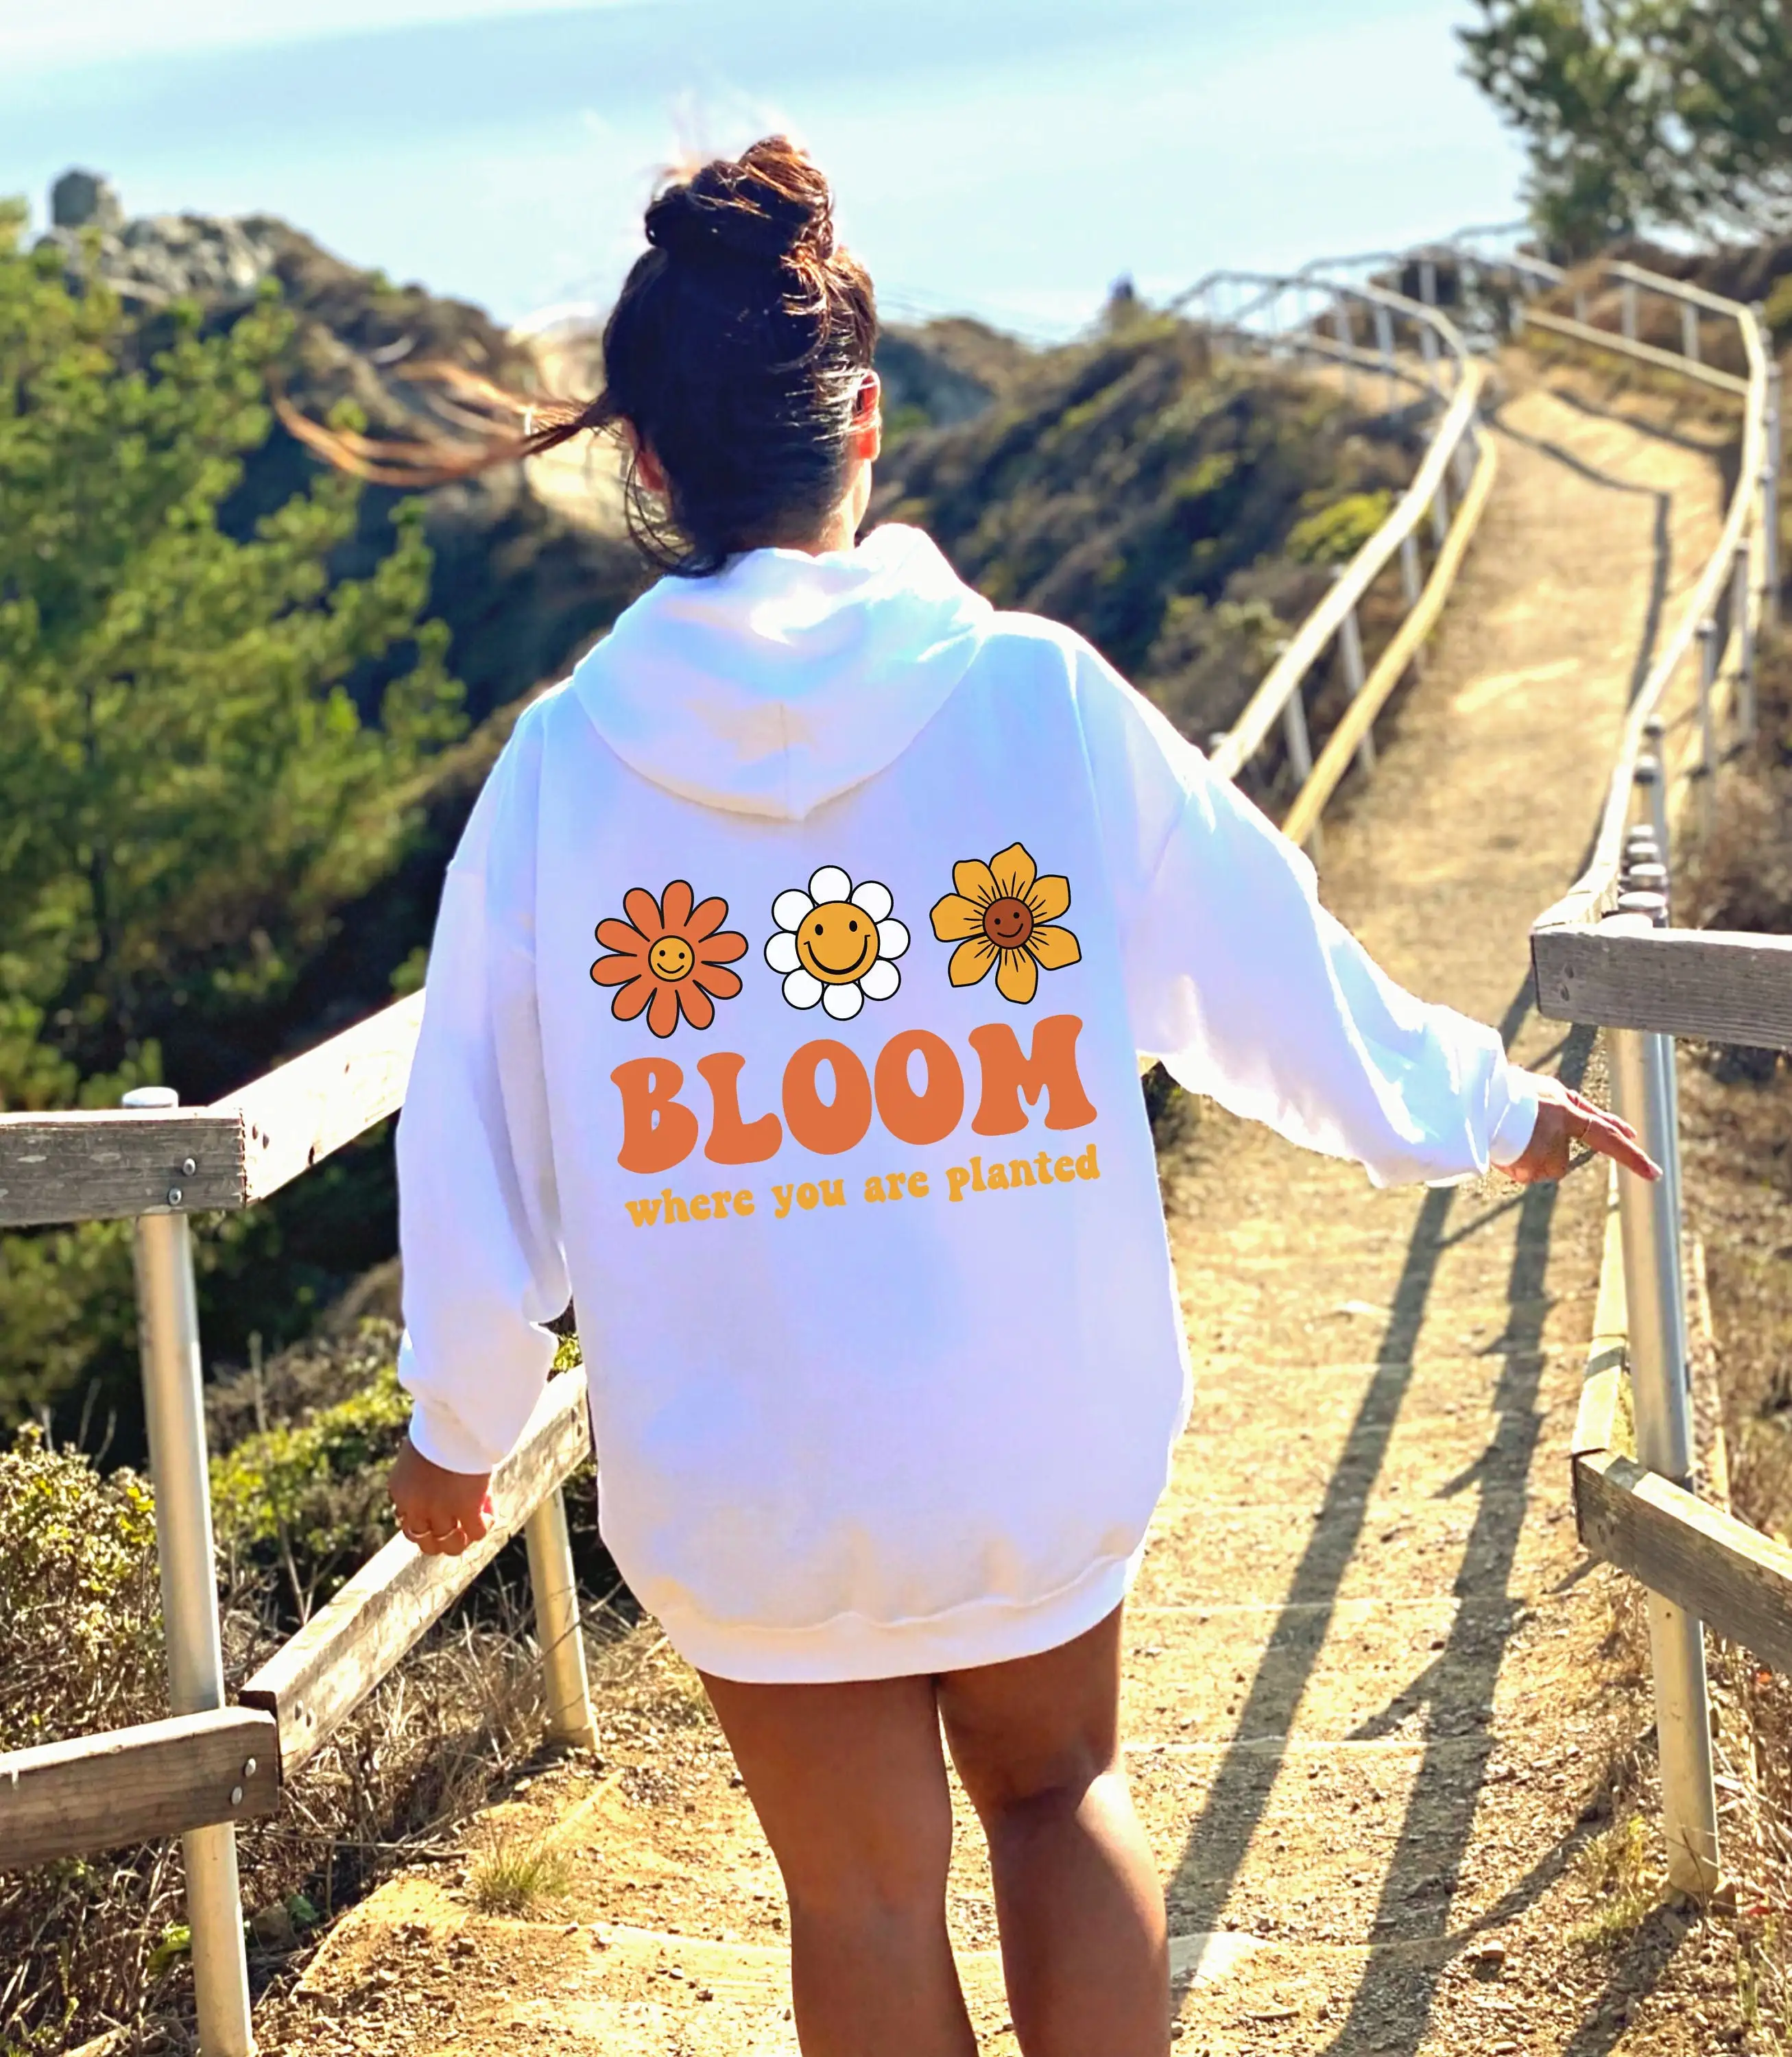 

Bloom where you are planted flowers graphic women fashion funny grunge tumblr hipster vintage hoodies hood quote pullovers tops